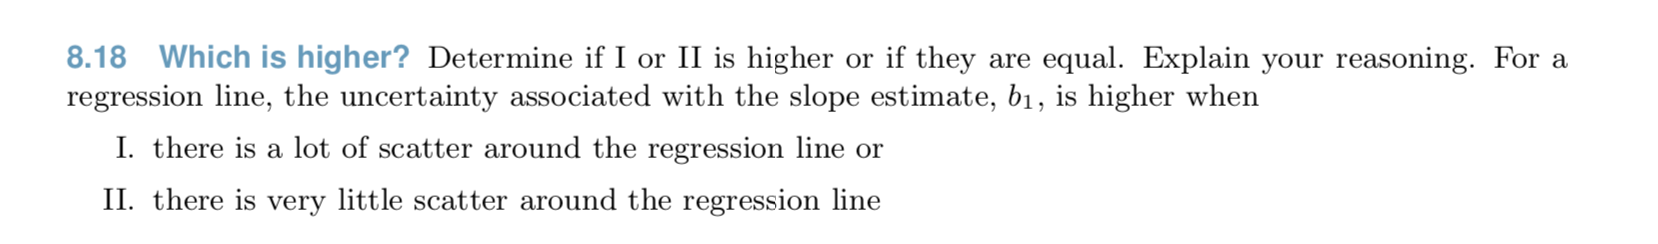 8.18 Which is higher? Determine if I or II is higher or if they are equal. Explain your reasoning. For a
regression line, the uncertainty associated with the slope estimate, b1, is higher when
I. there is a lot of scatter around the regression line or
II. there is very little scatter around the regression line
